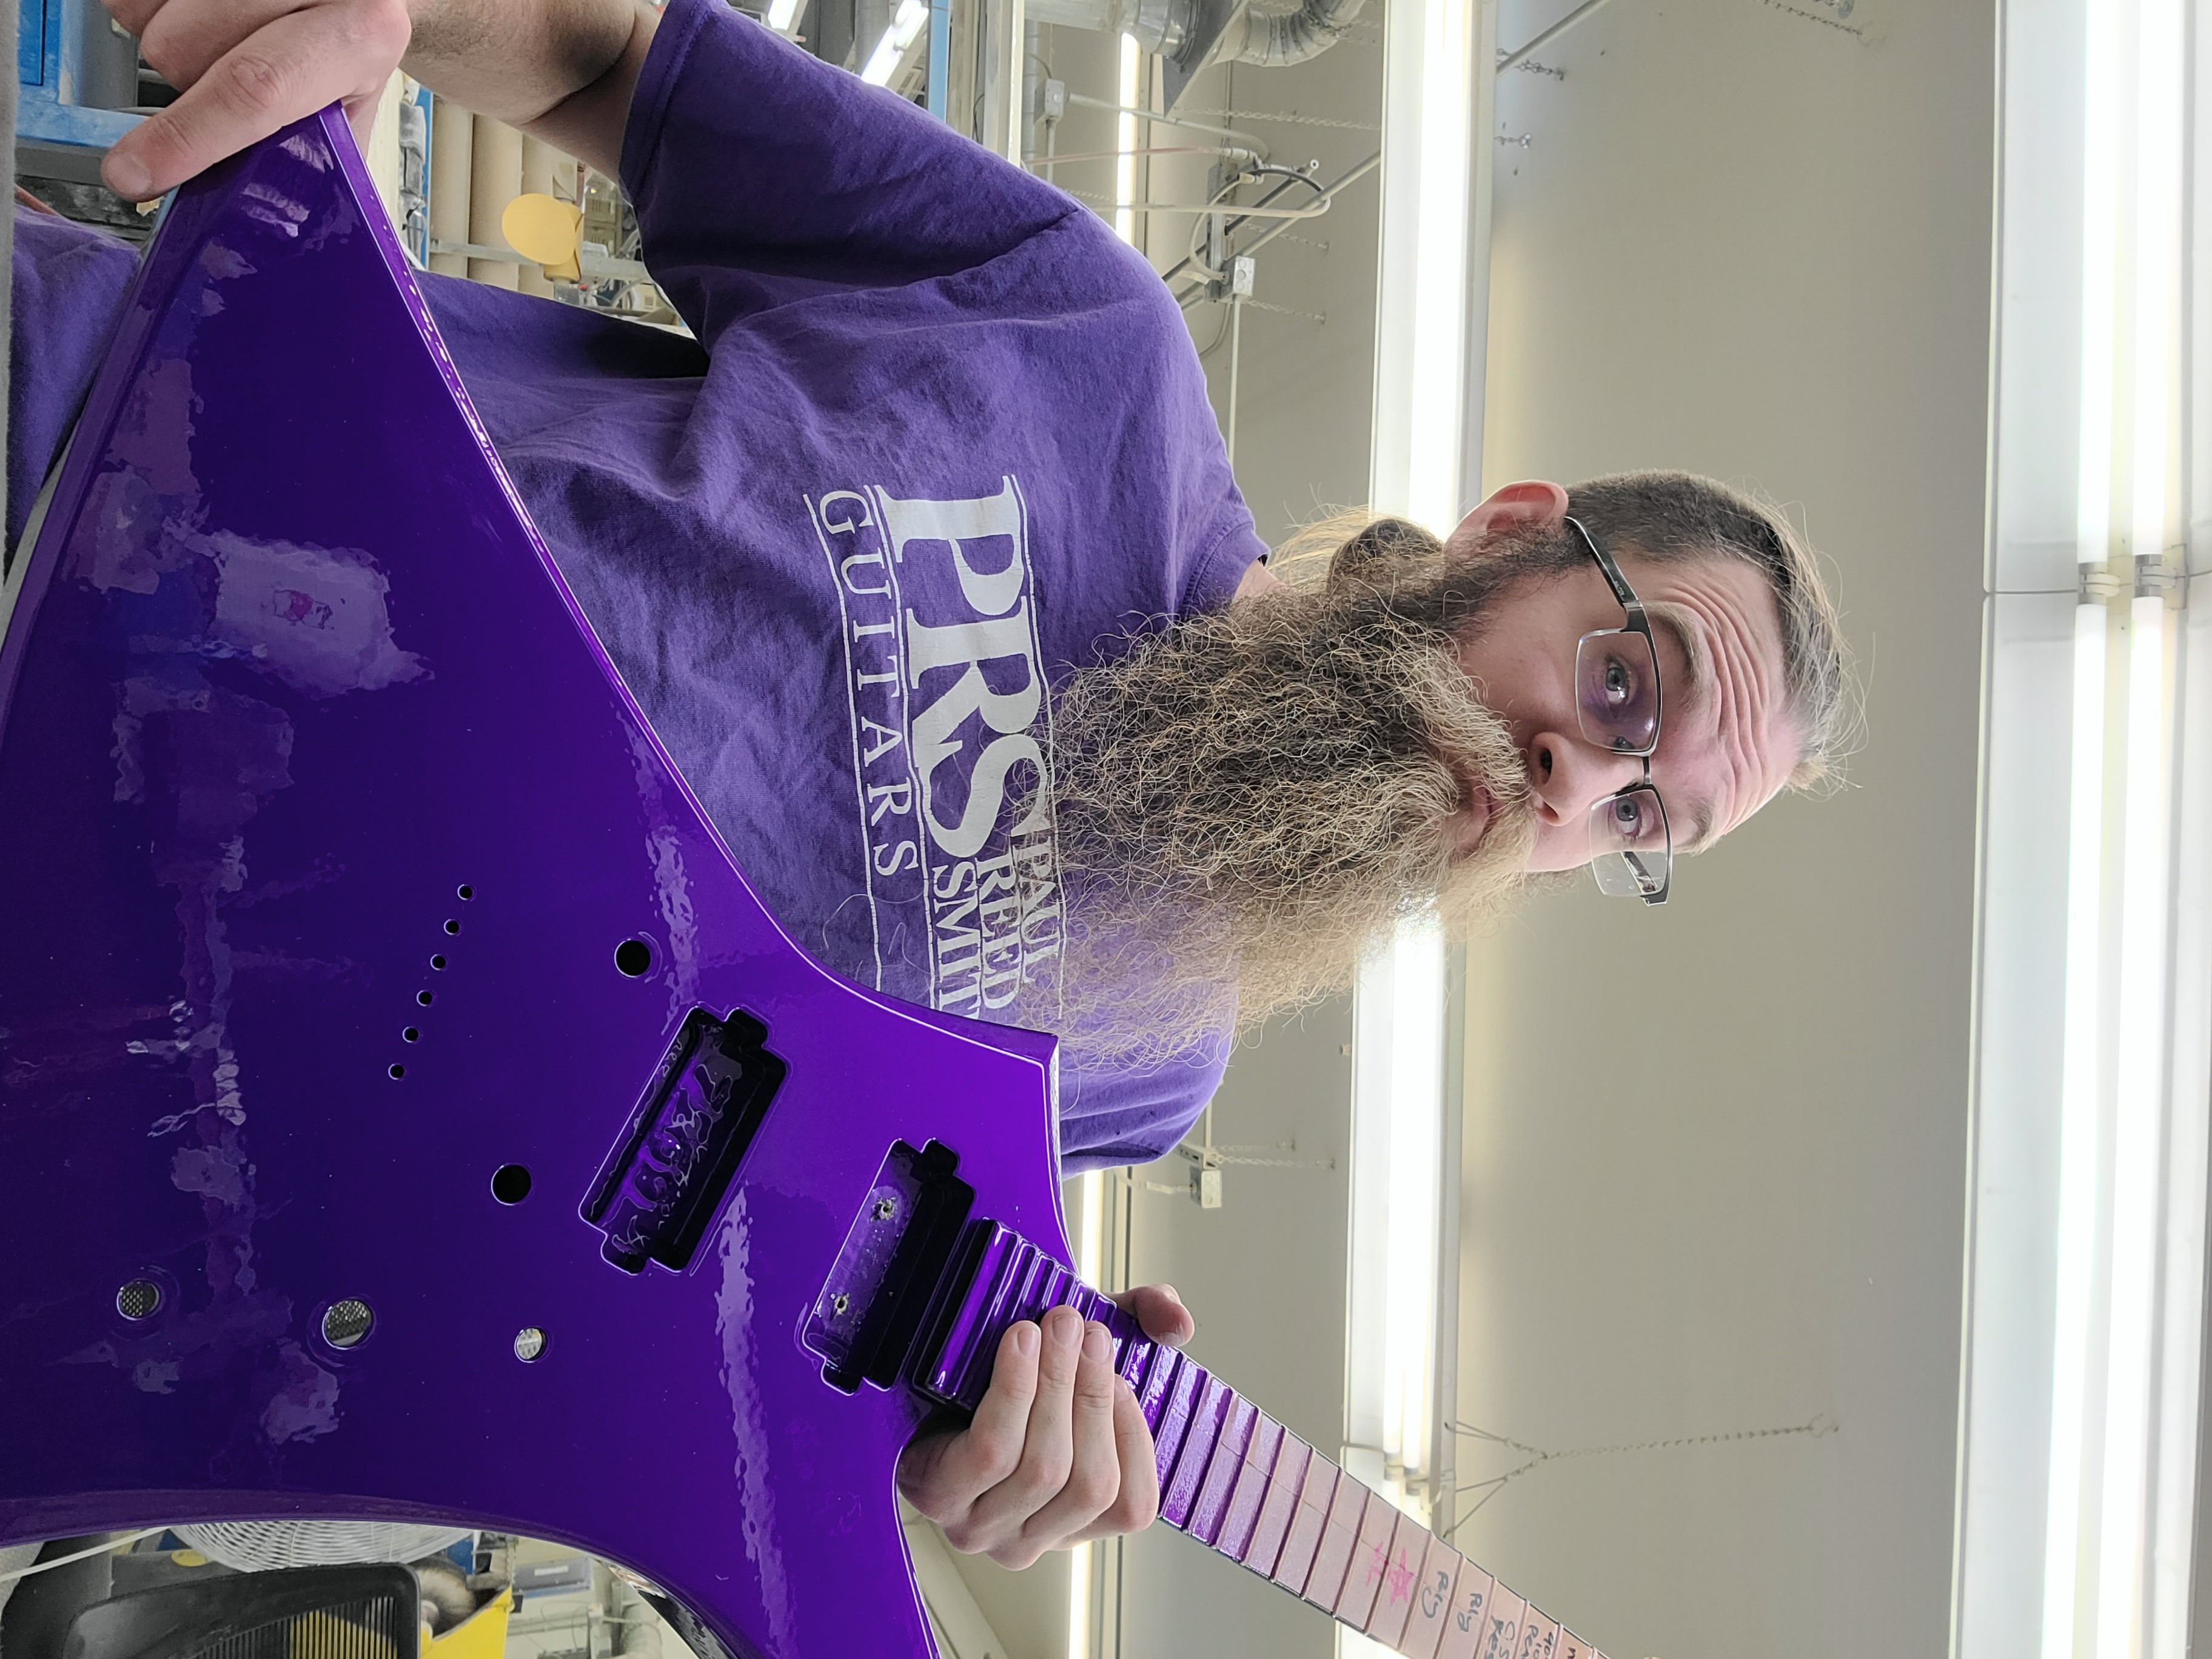 A photo shows Nathan Songne posing for a selfie with a purple guitar.